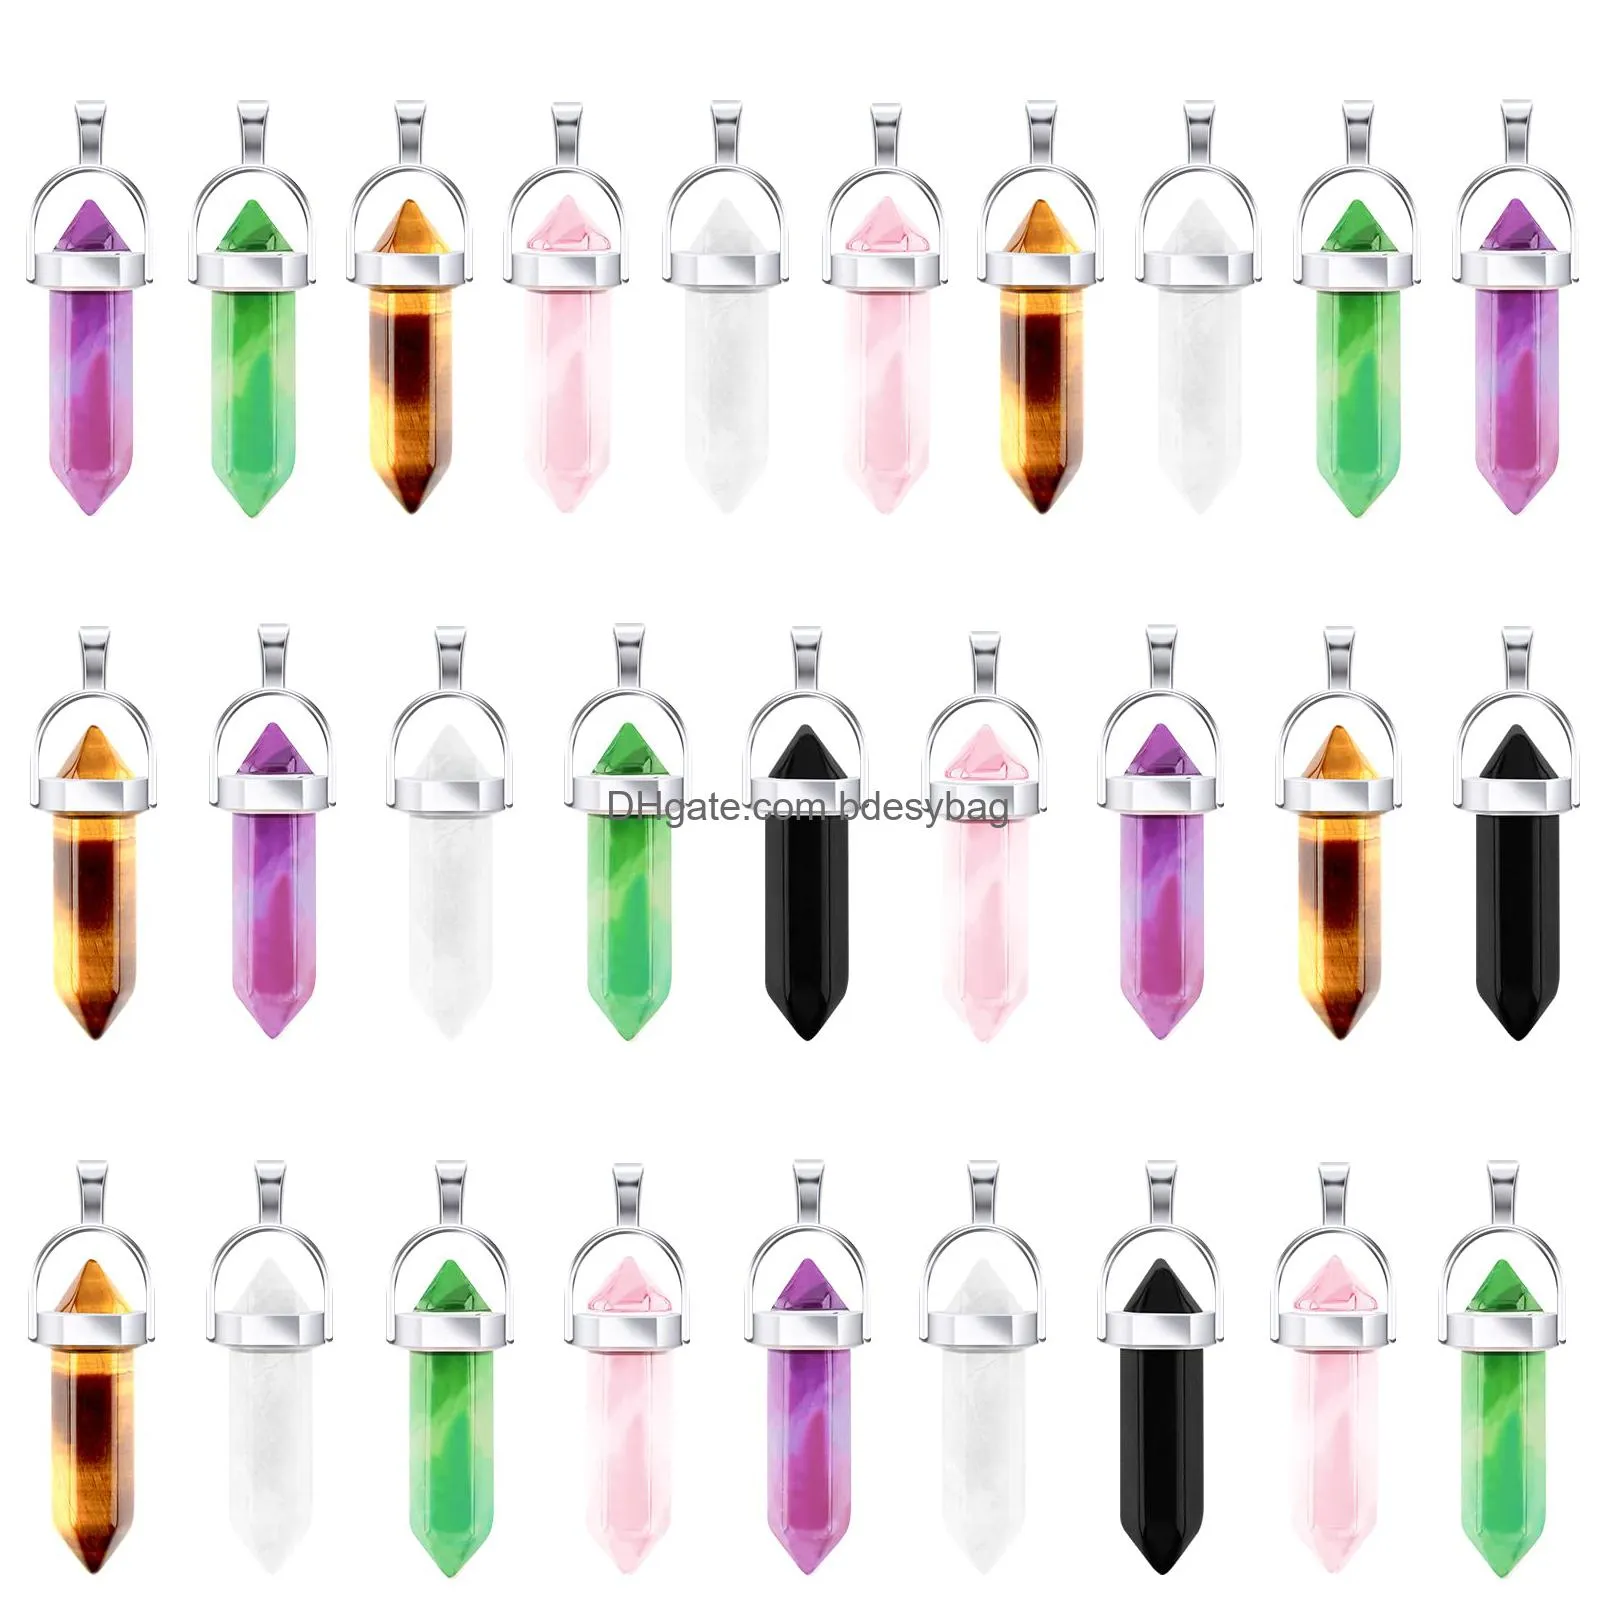 nbeads hexagonal crystal pendants bullet crystal pendants quartz stone pointed gemstone charms for necklaces jewelry making